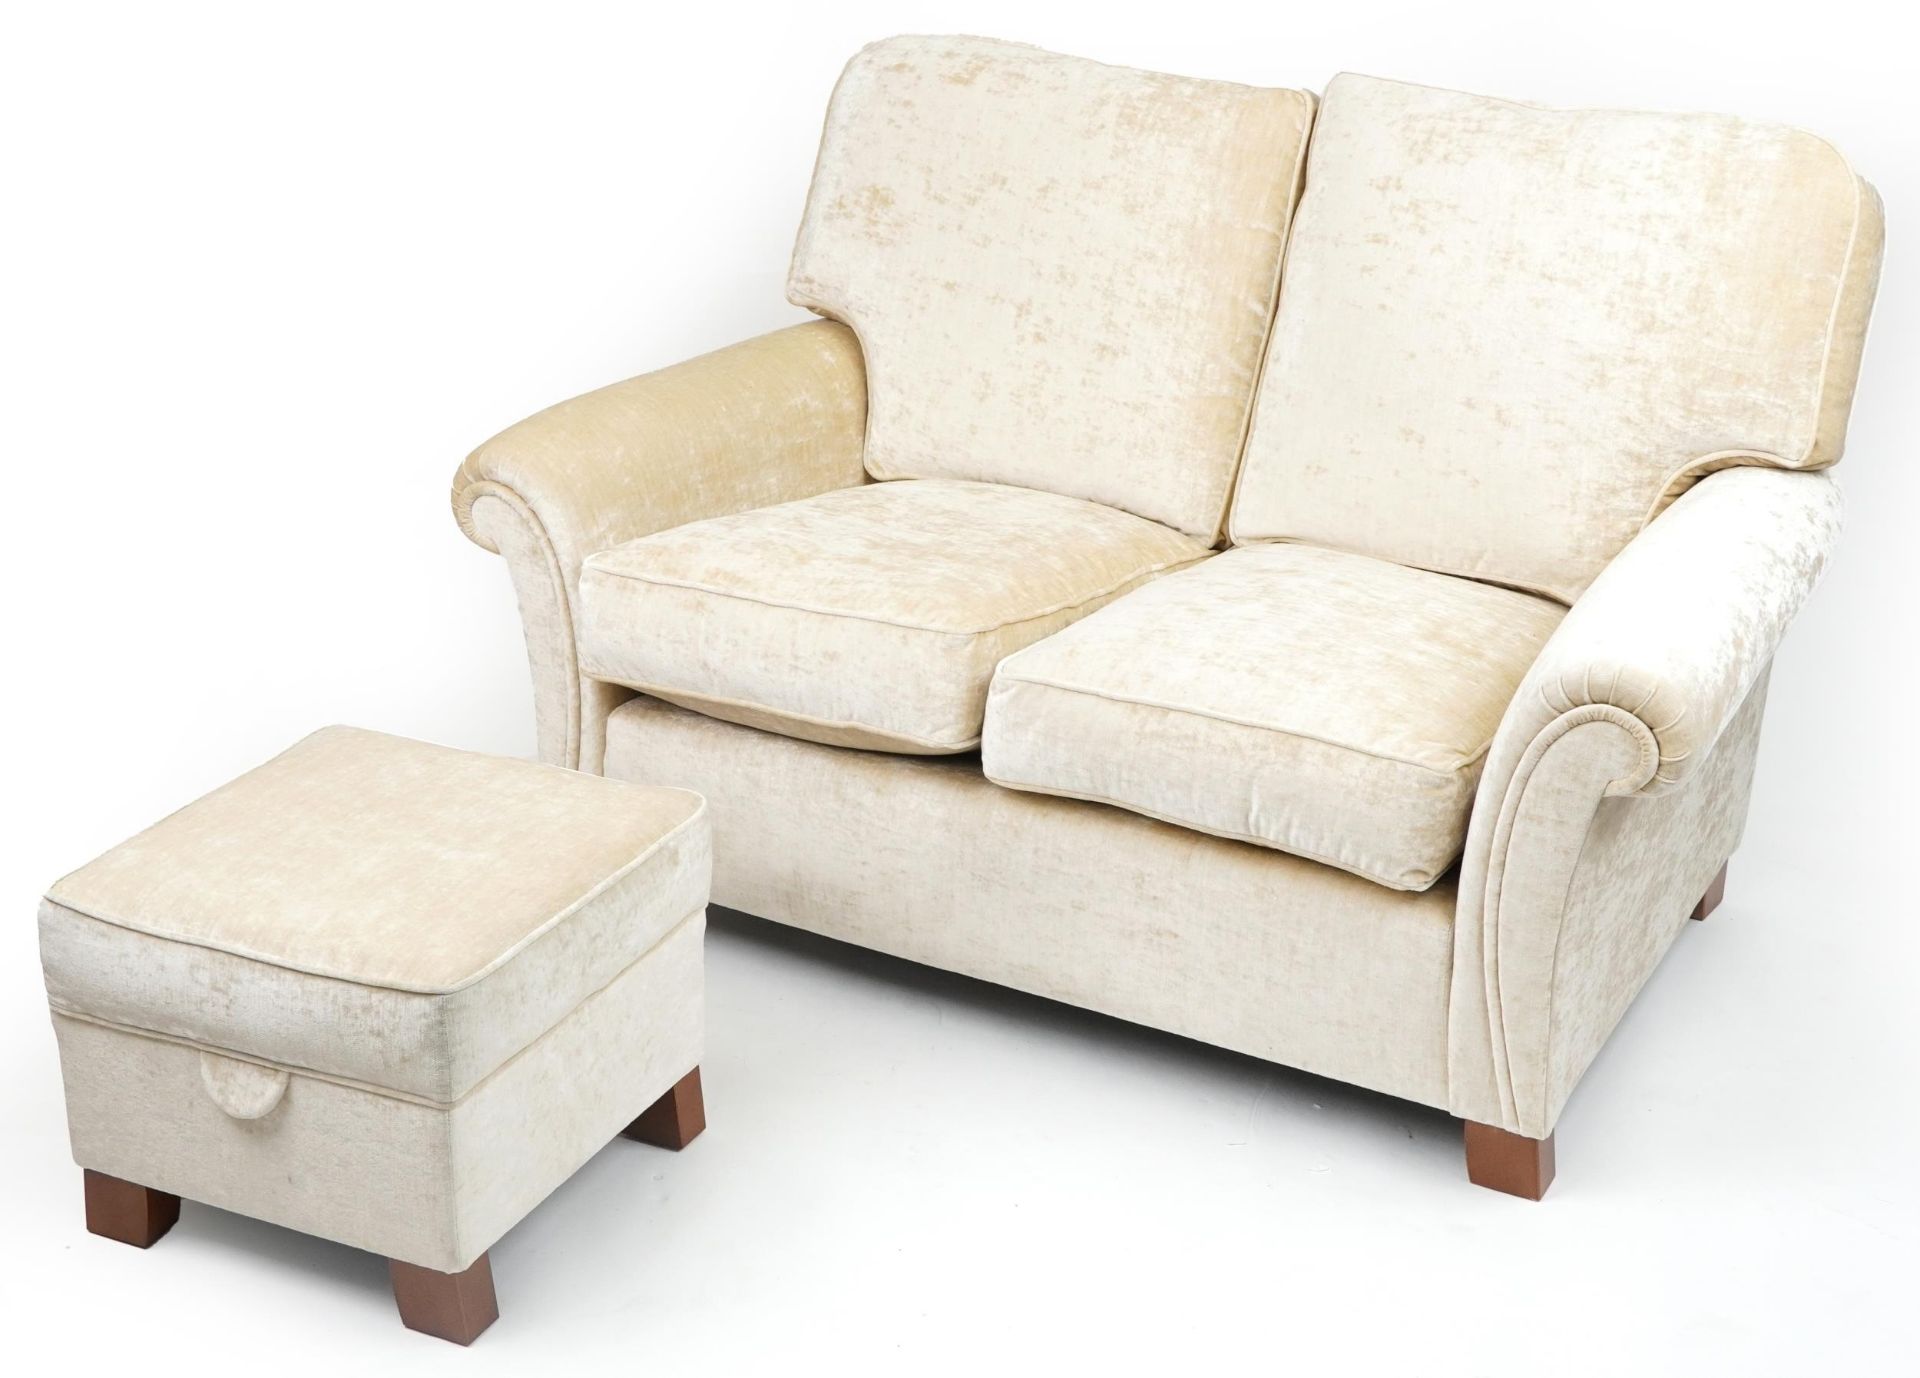 Contemporary beige upholstered two seater settee with matching footstool, 100cm H x 145cm W x